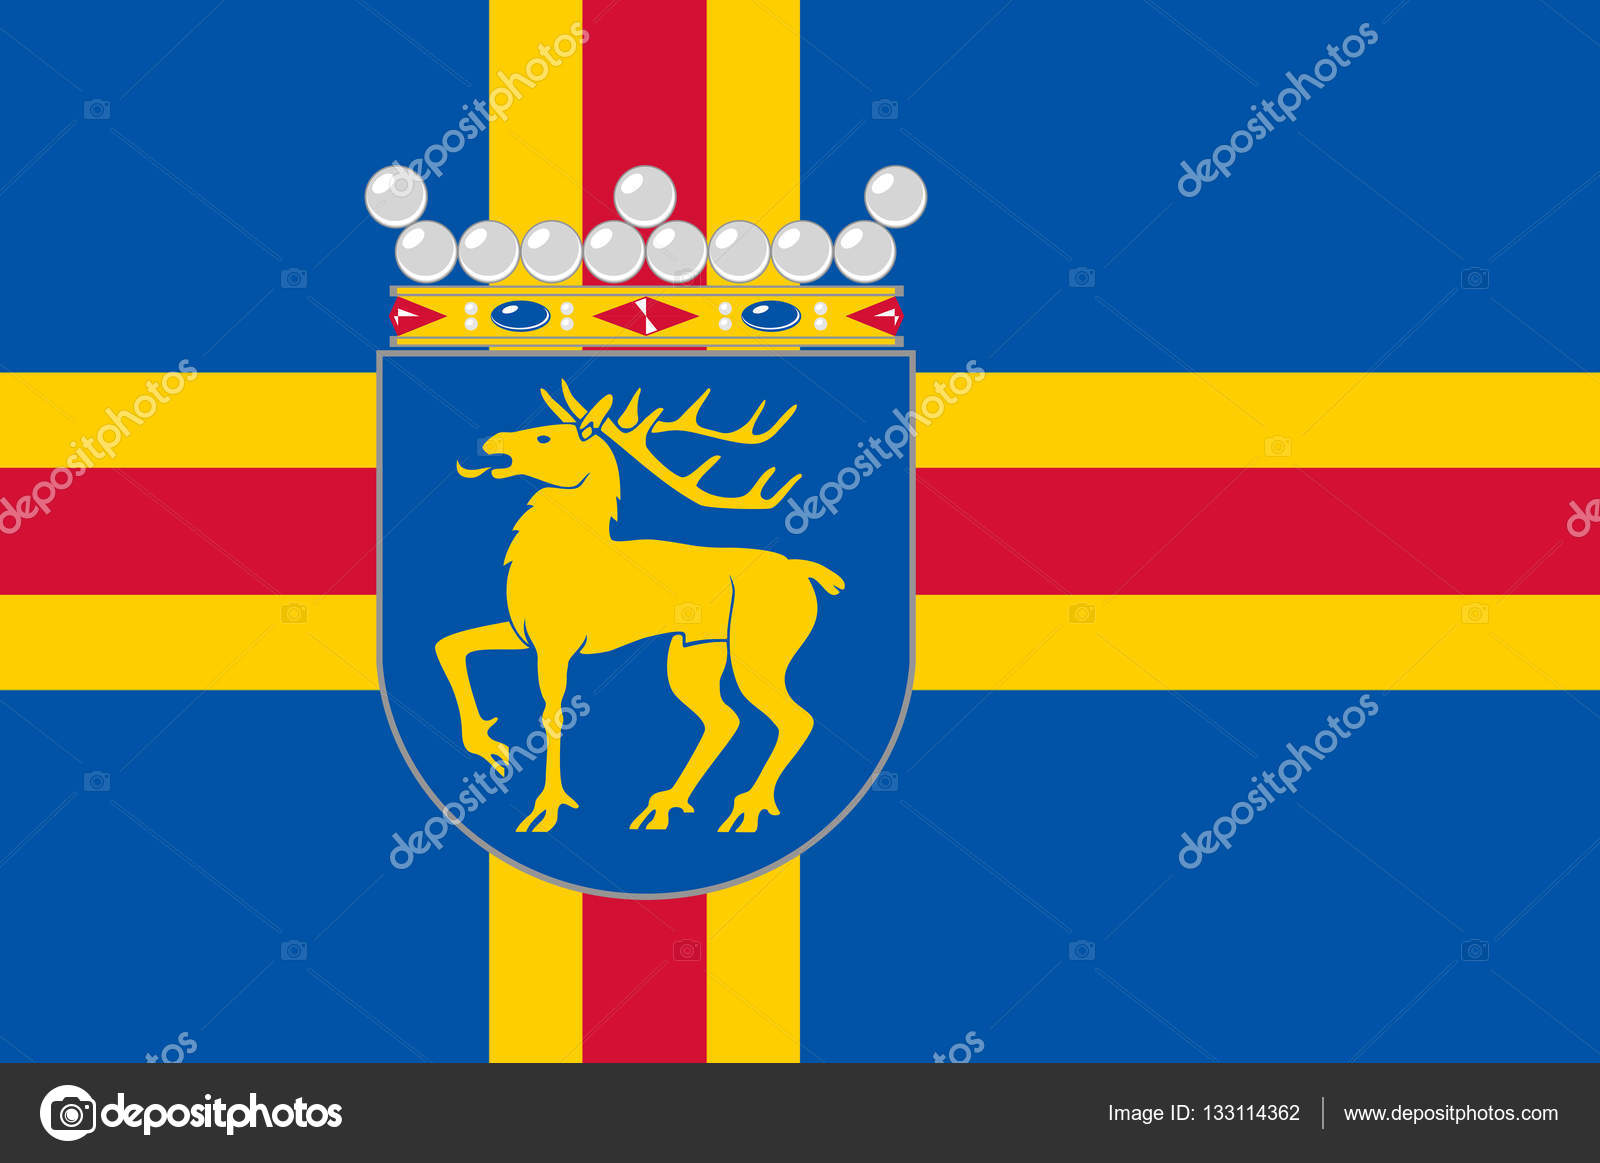 Flag Of Aland Islands Is A Region Of Finland Stock Photo Image By C Dique Bk Ru